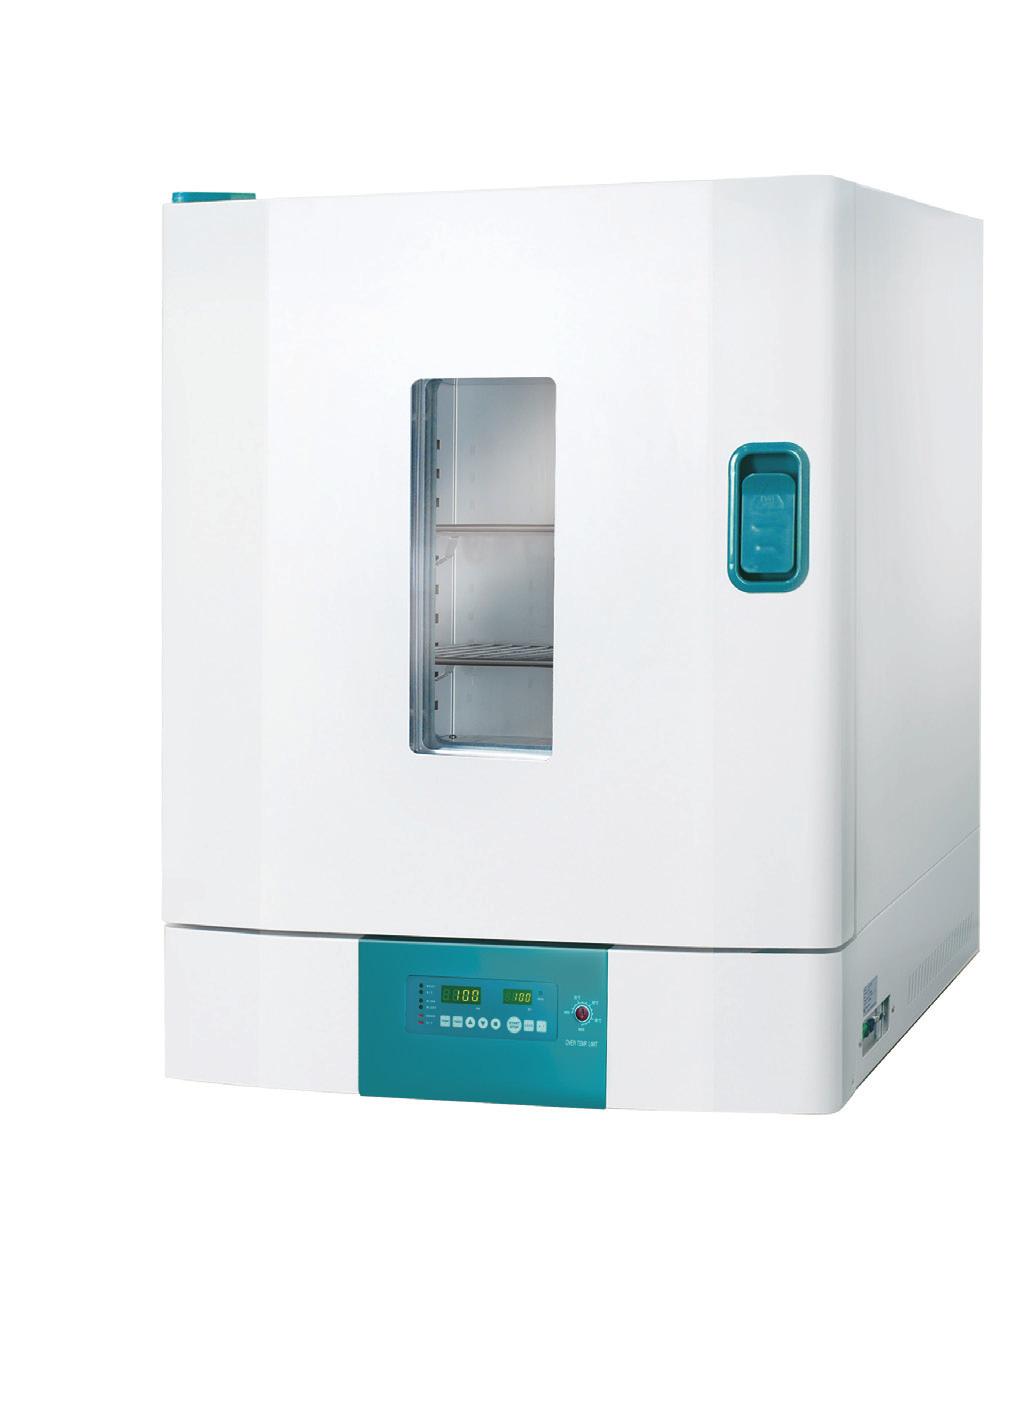 Natural Convection (General) Performance Temperature range from ambient +15 to 250 Microprocessor PID control / Temperature calibration / Automatic tuning.